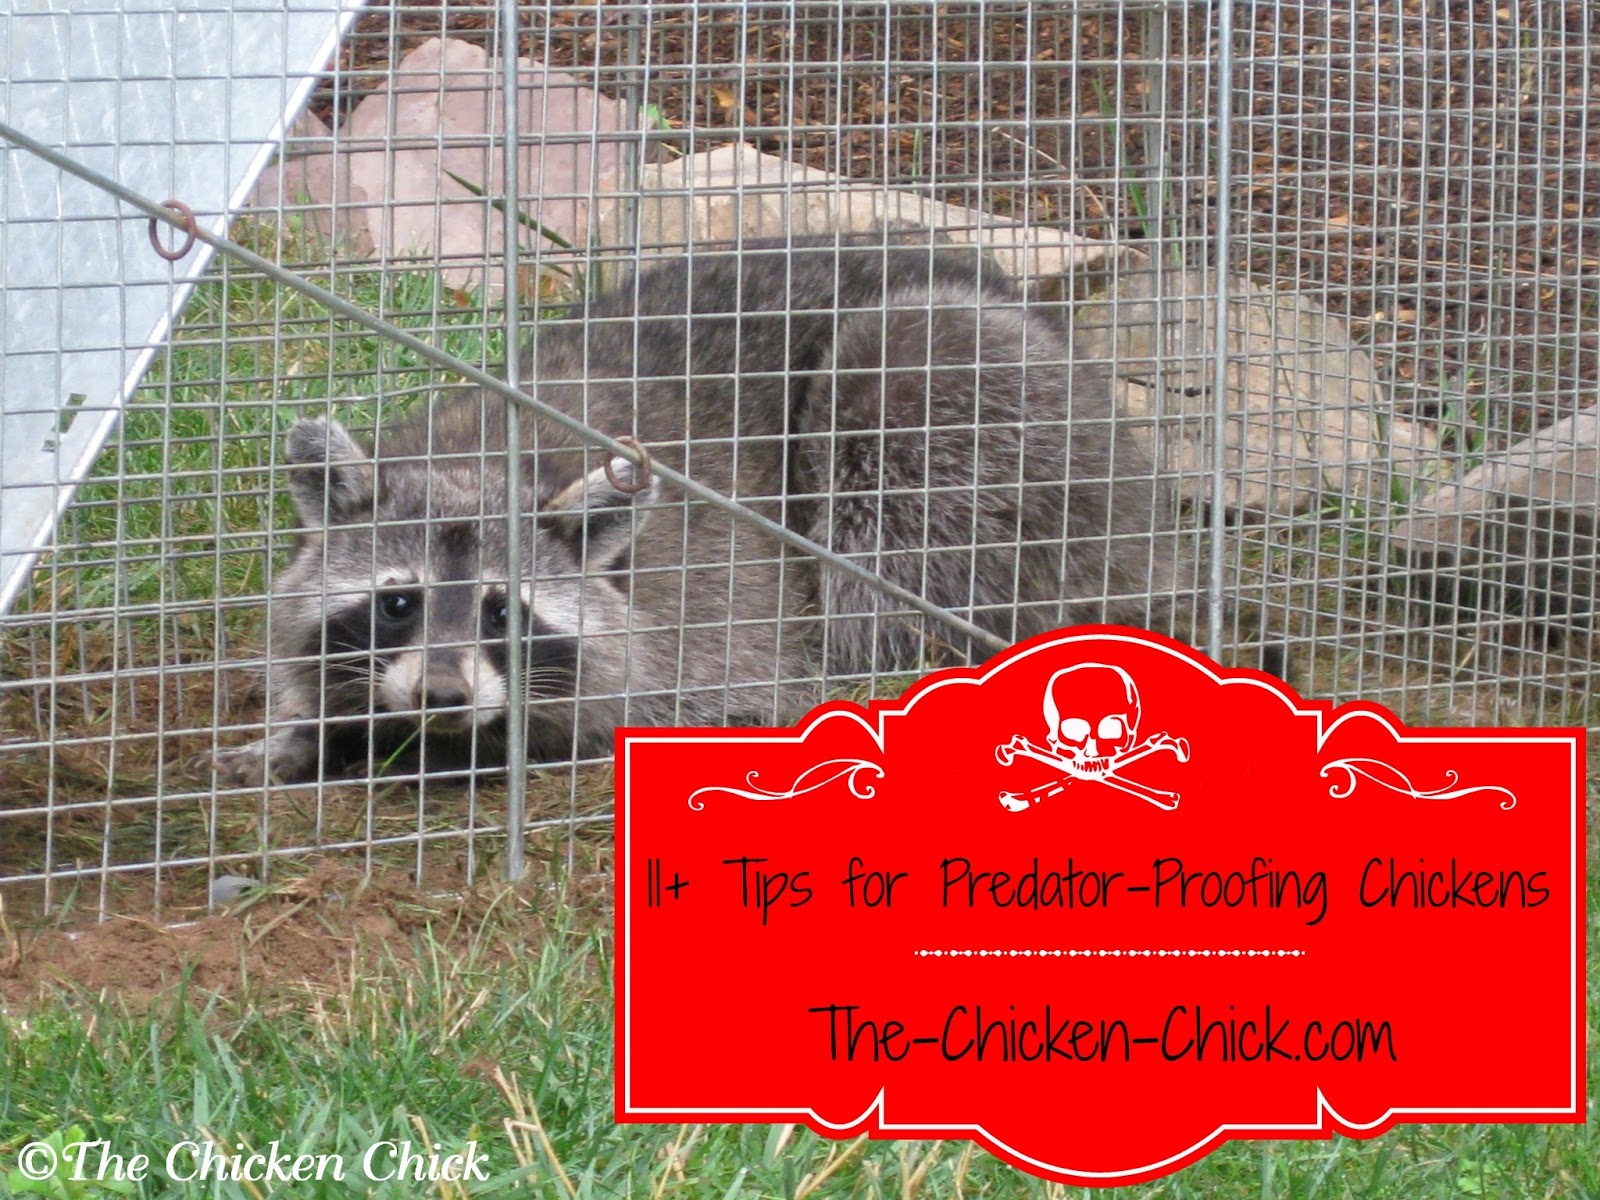 The Chicken Chick®: 11+ Tips for Predator-proofing Chickens